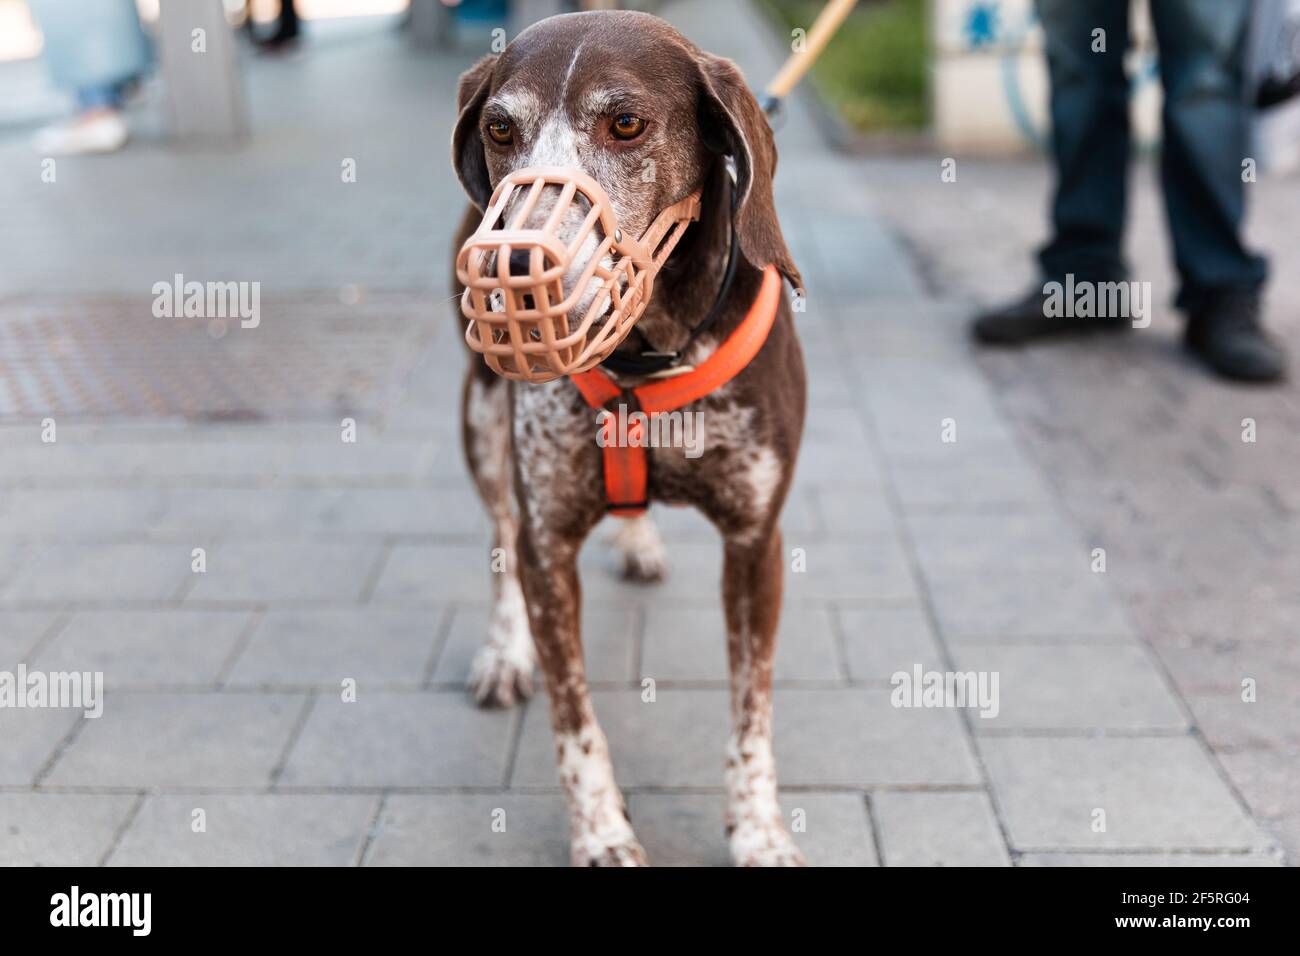 German Shorthaired Pointer dog in muzzle and on leash Stock Photo